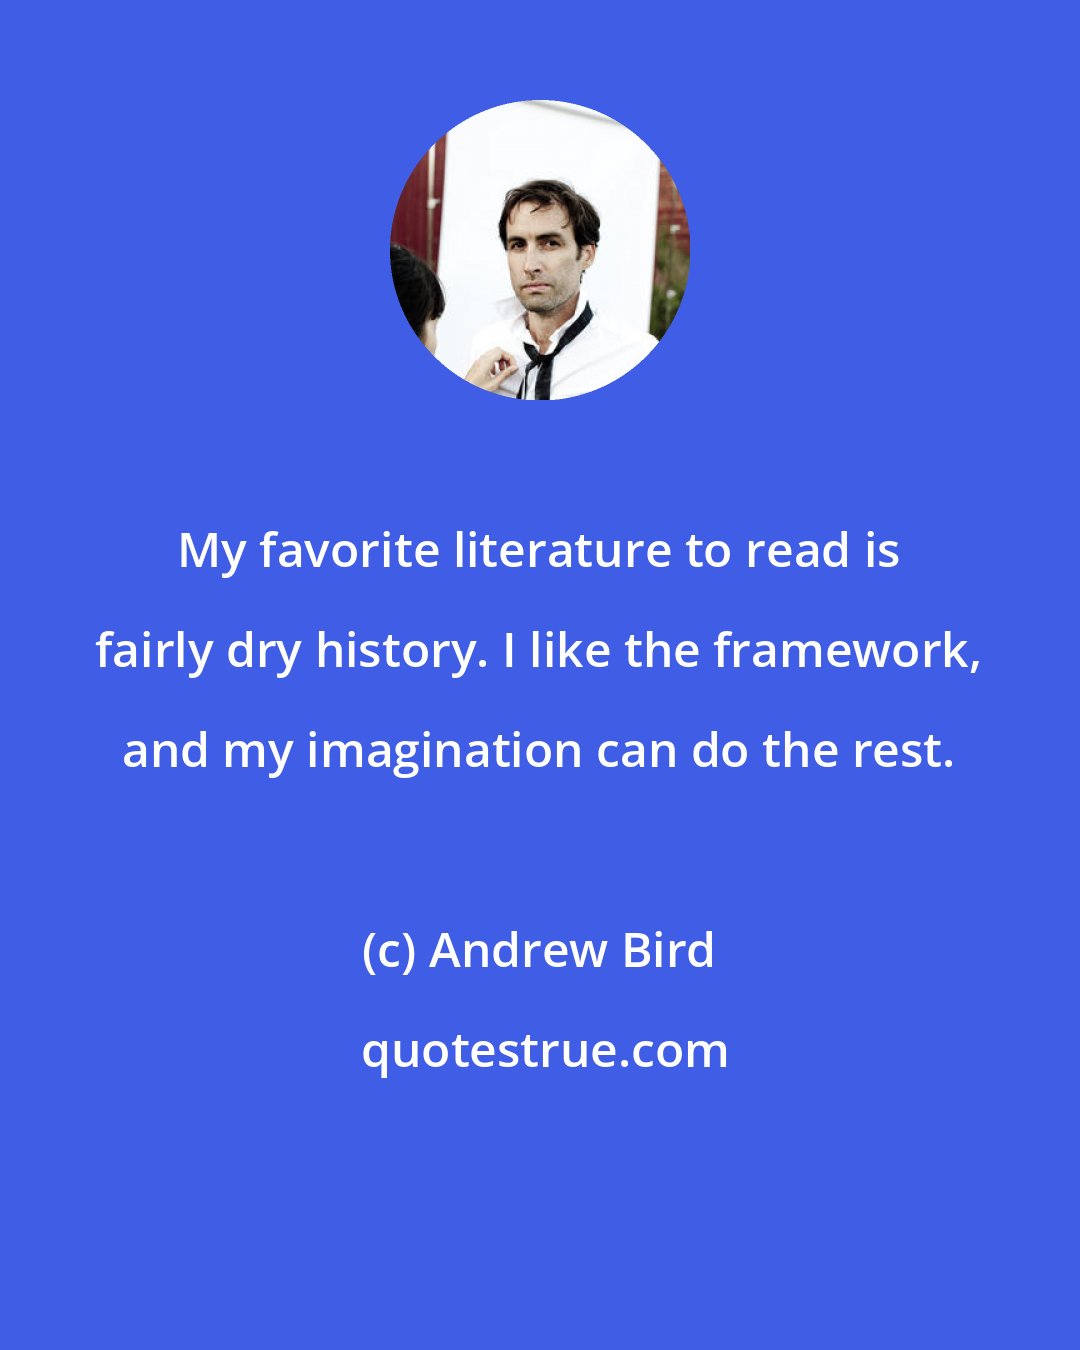 Andrew Bird: My favorite literature to read is fairly dry history. I like the framework, and my imagination can do the rest.